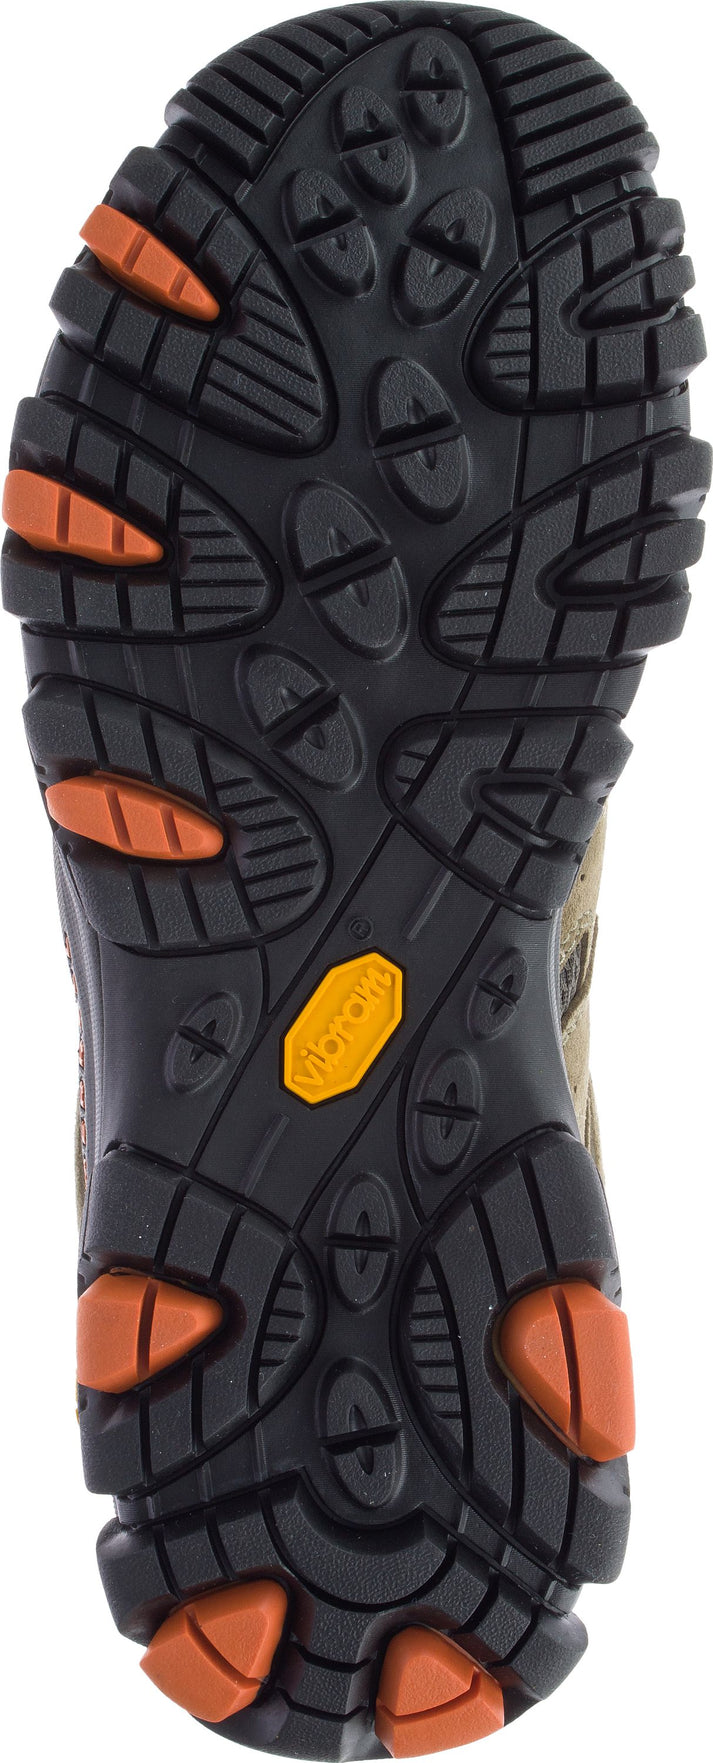 Merrell Shoes Moab 3 Waterproof Olive